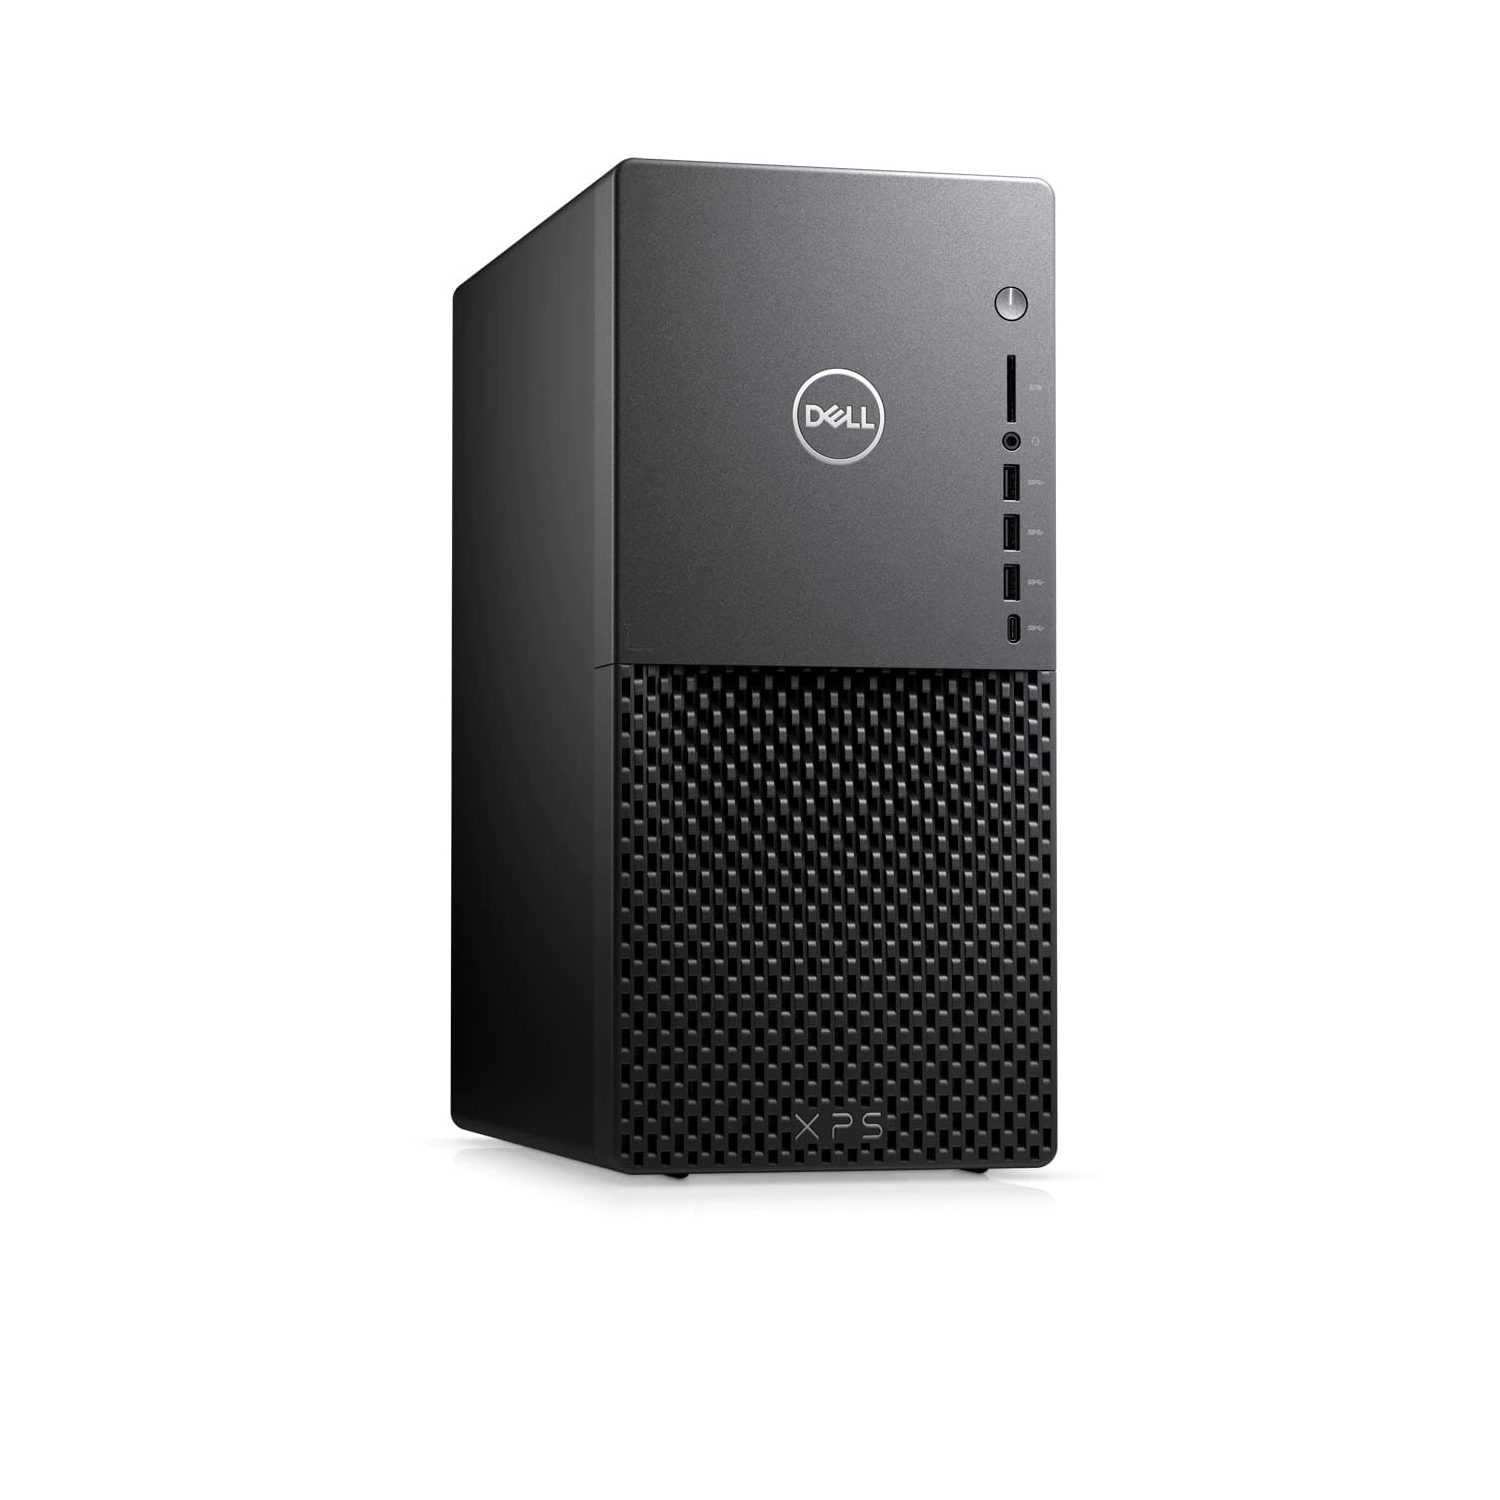 Refurbished (Excellent) - Dell XPS 8940 Desktop (2020) | Core i7 - 1TB HDD + 512GB SSD - 16GB RAM - 1660 Ti | 8 Cores @ 4.8 GHz - 10th Gen CPU Certified Refurbished